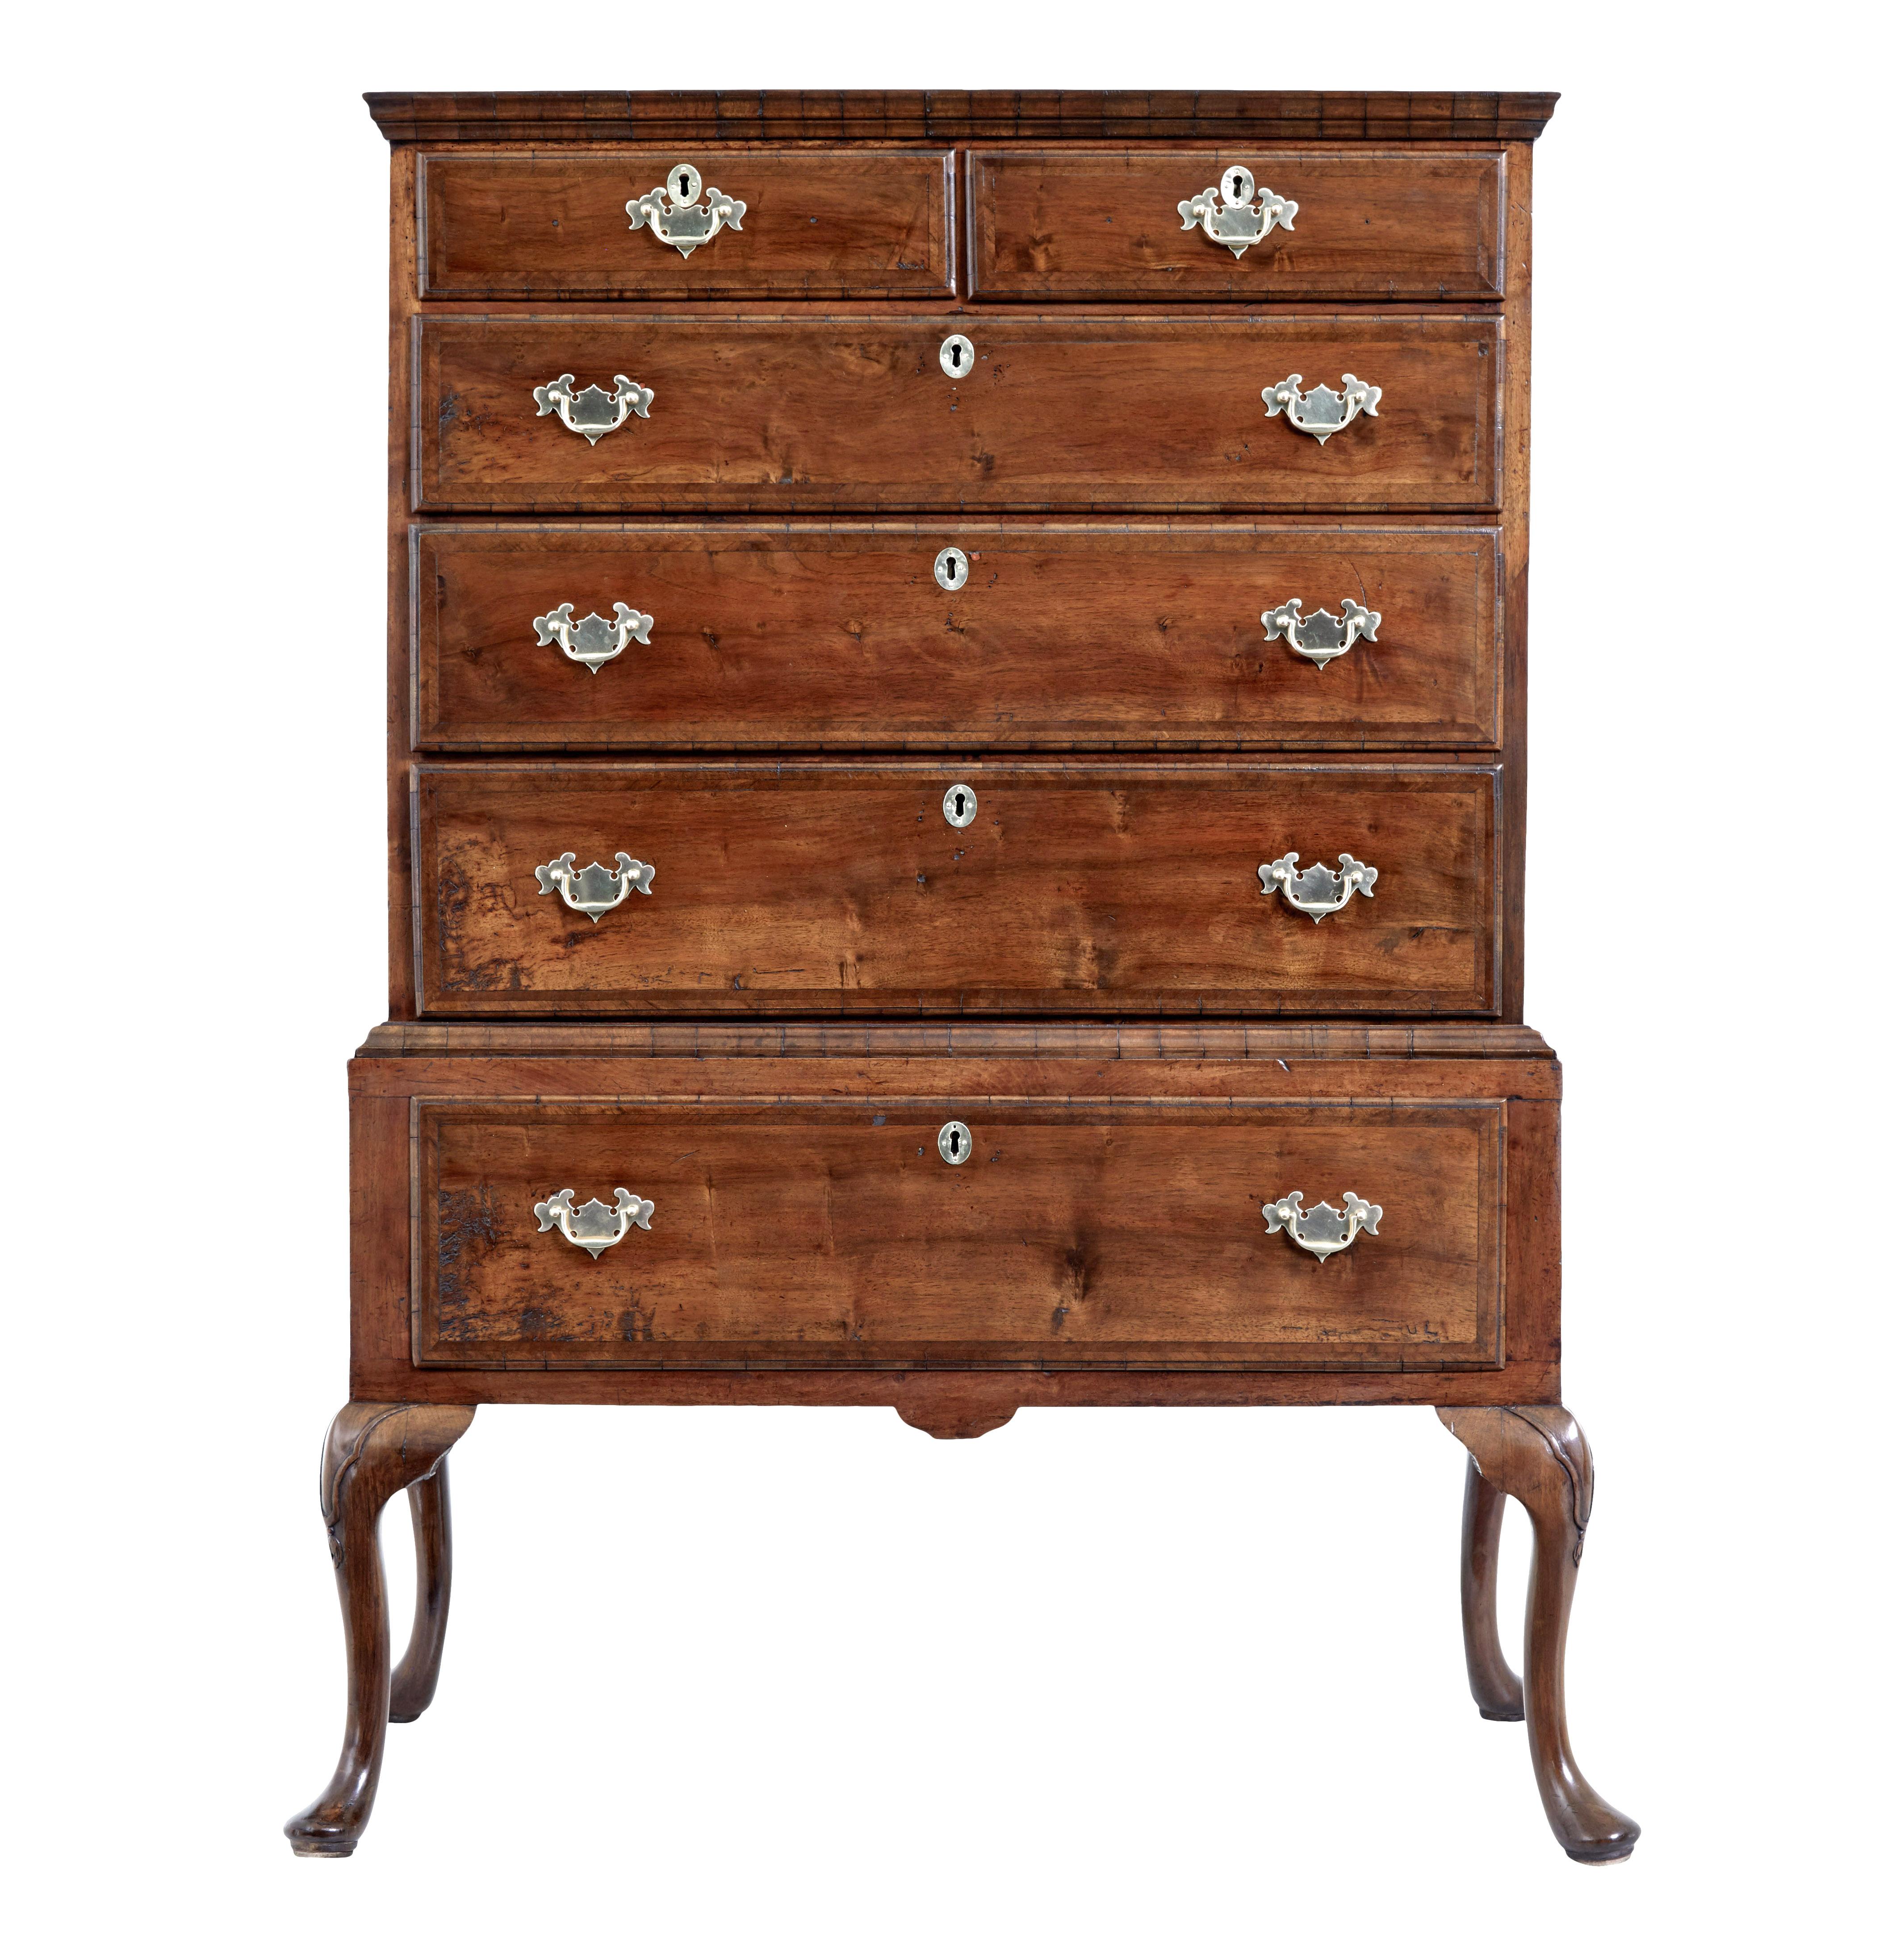 Late 17th century William and Mary walnut chest on stand circa 1690.

Good quality 2 piece William and Mary period chest on original base.

Shaped cornice to the top surface with a 2 over 3 drawer layout below. Each drawer cross banded with